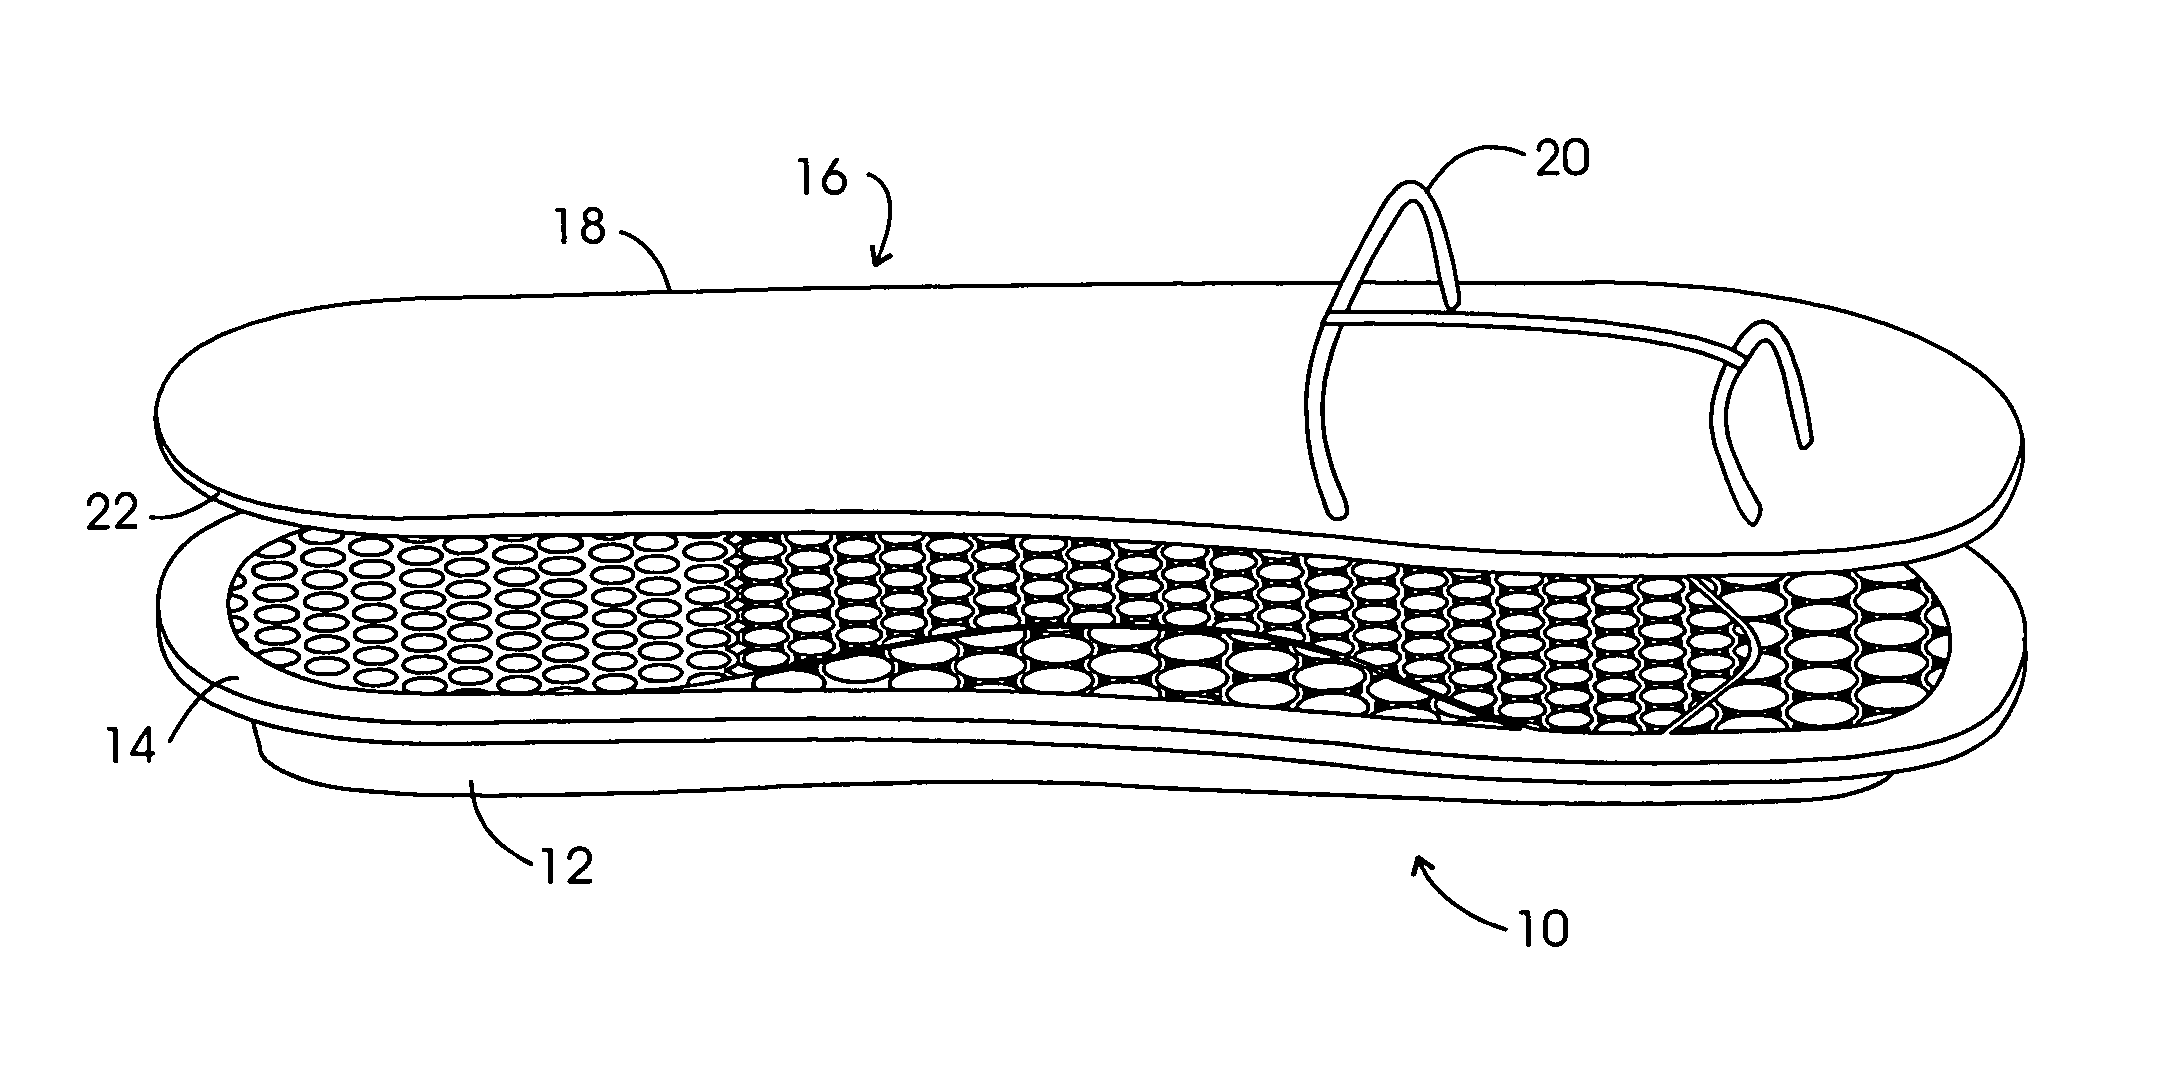 Elastomeric sole for use with converted flatbed sewing machine